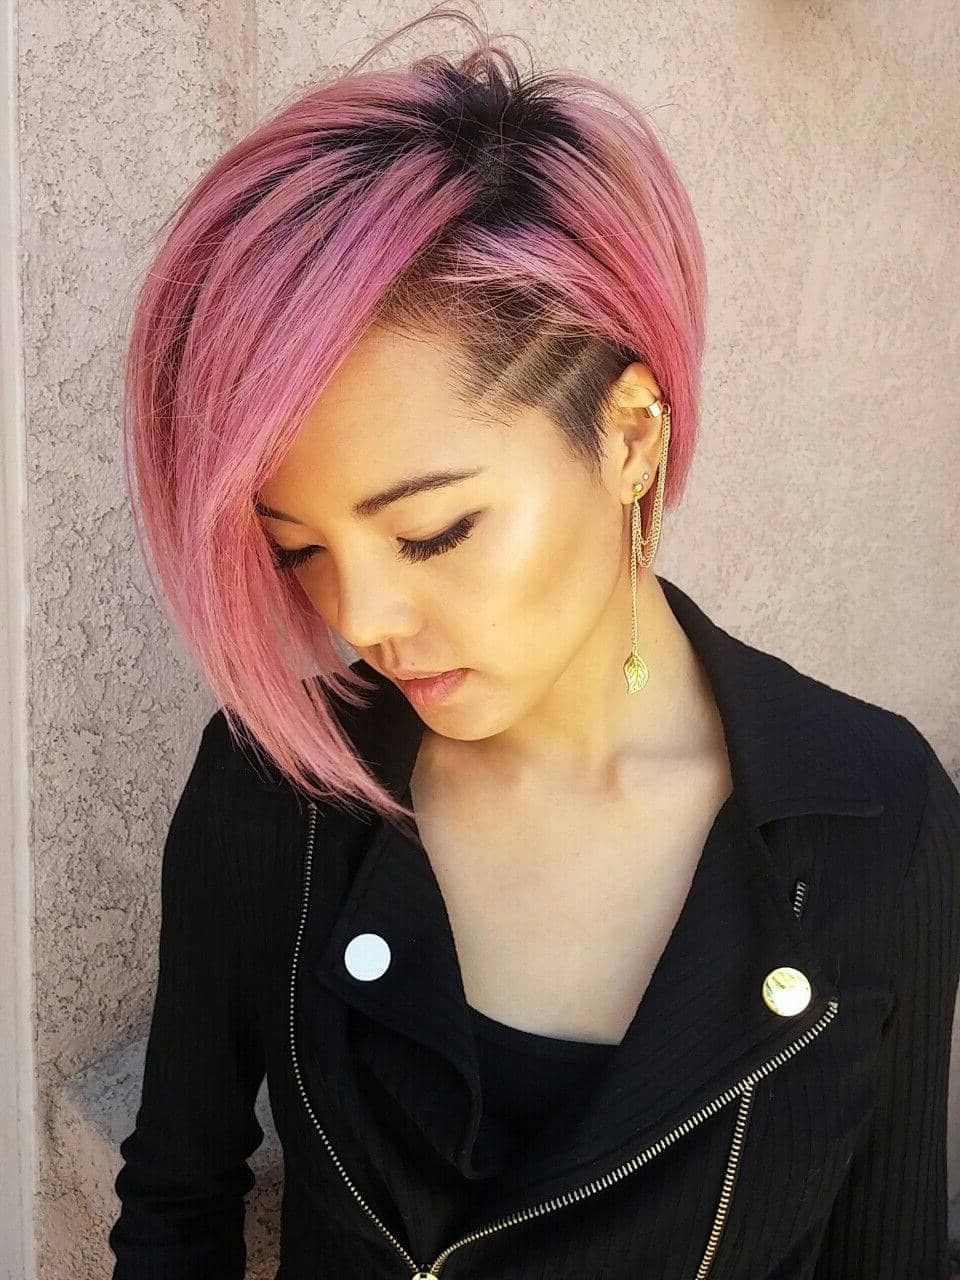 50 Pixie Haircuts You'll See Trending In 2019 With Regard To Classy Pixie Haircuts (View 20 of 20)